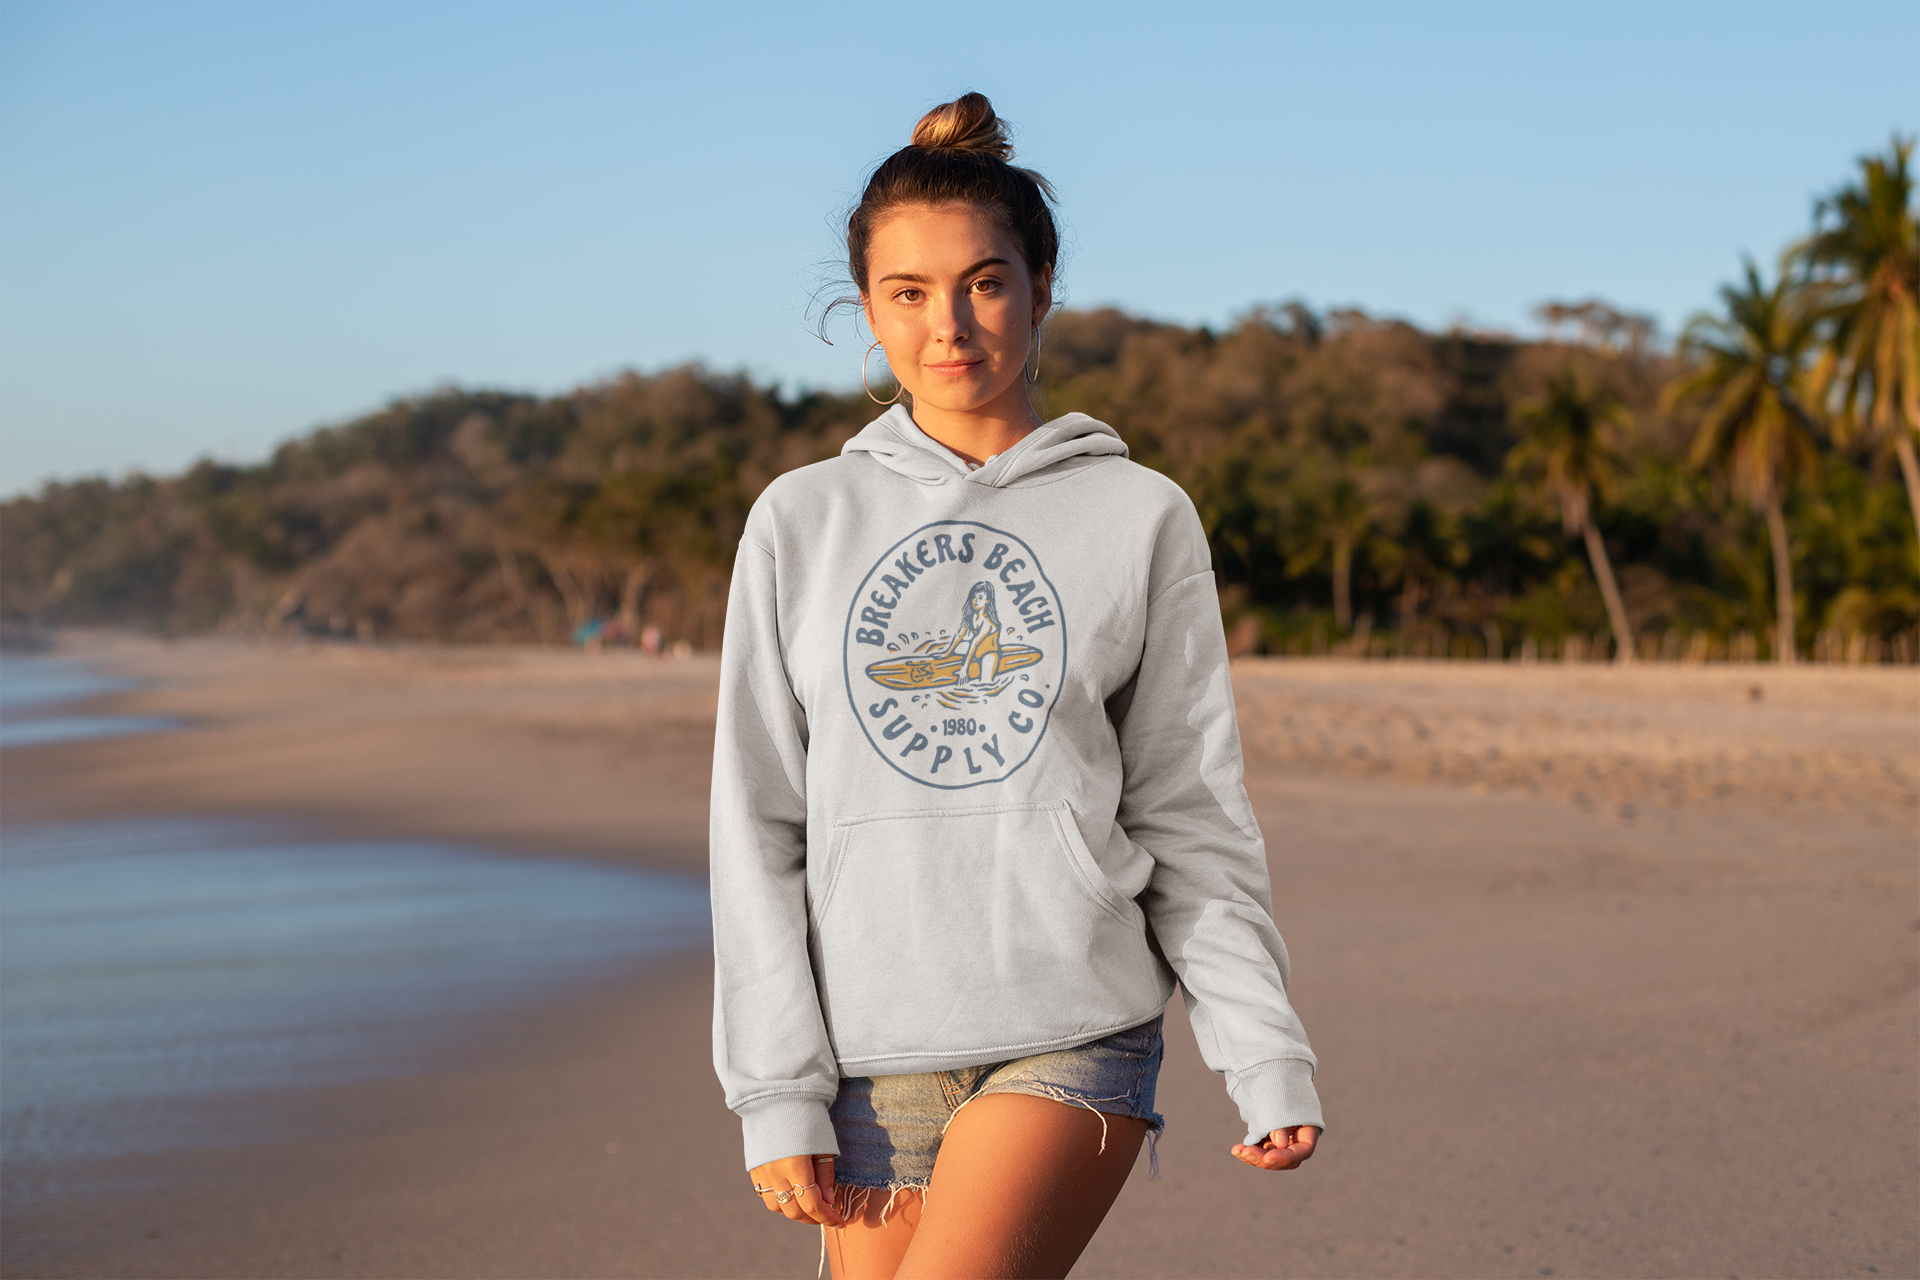 At Breakers Beach Supply, we strive to provide high-quality products and apparel that embody the spirit of the water. 